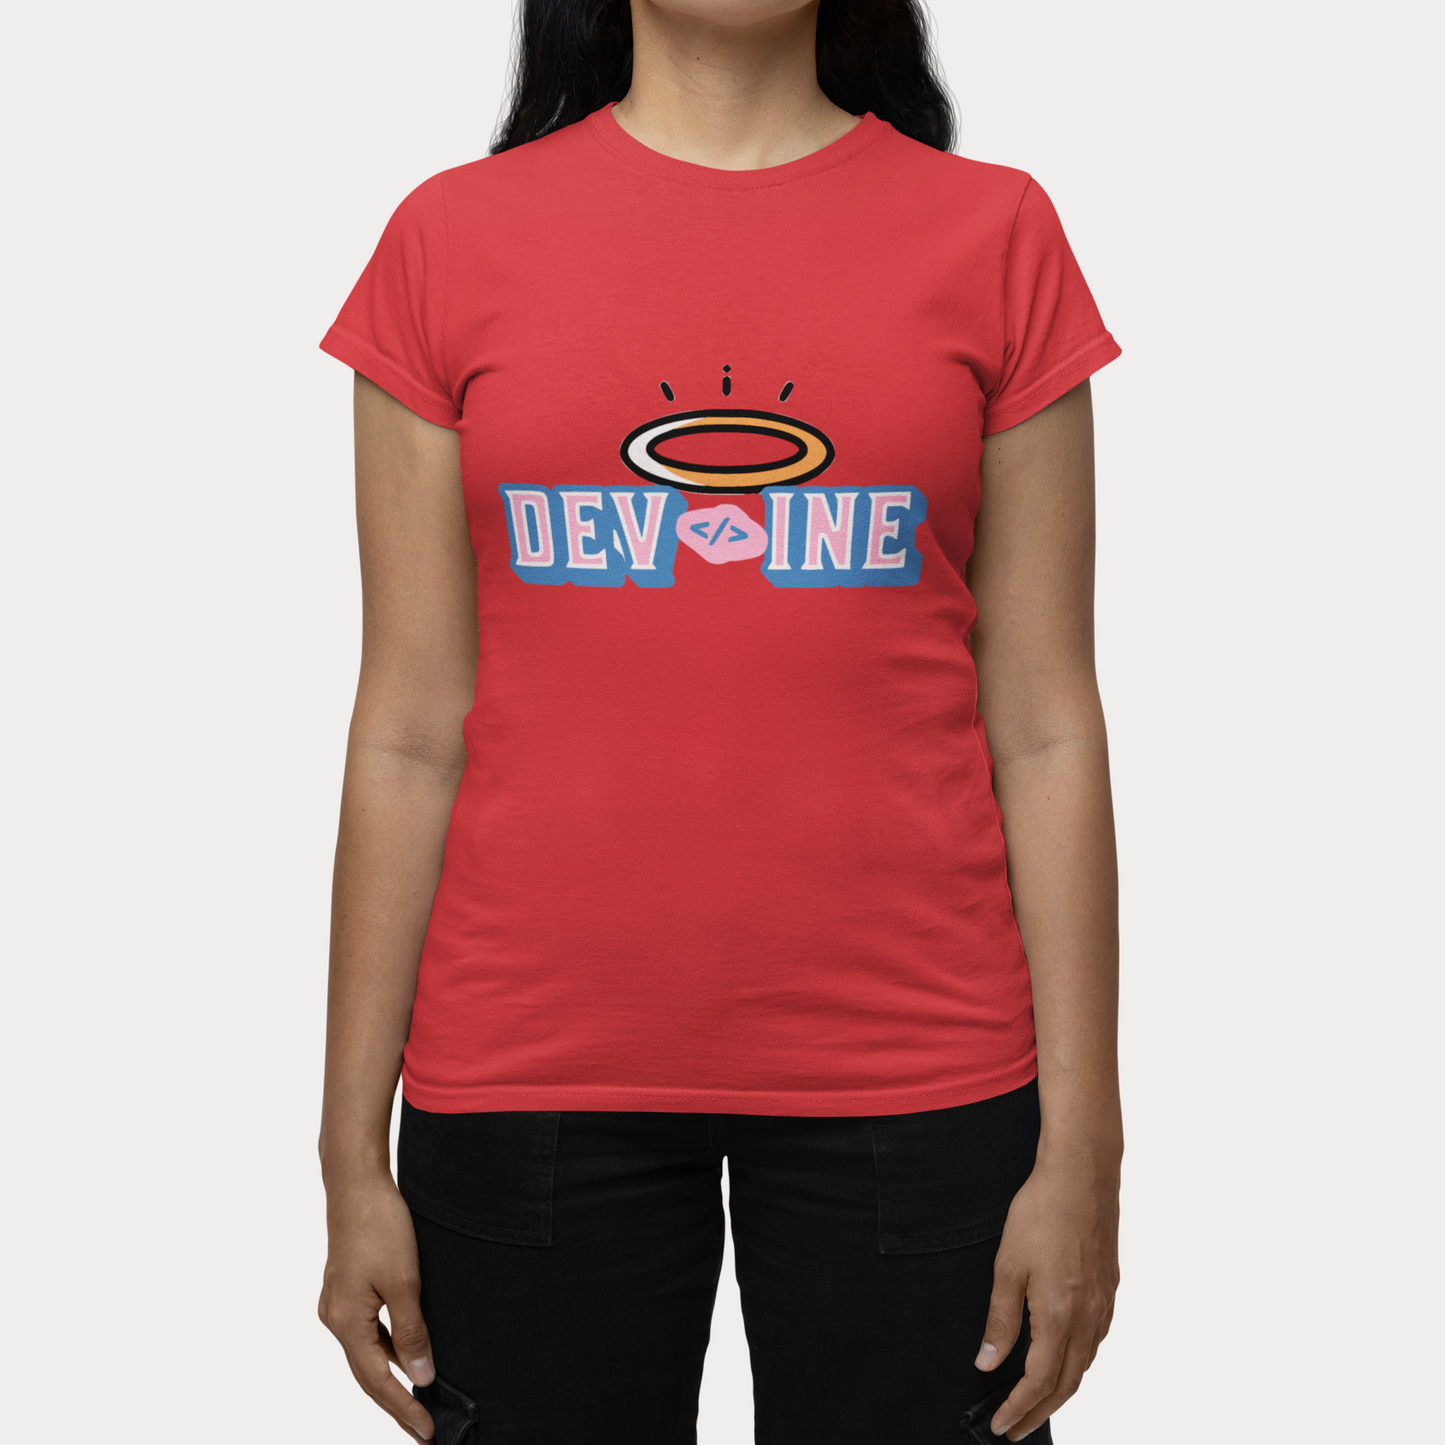 Funny t-shirts - Software developer Devine code - Women's Midweight Cotton Tee